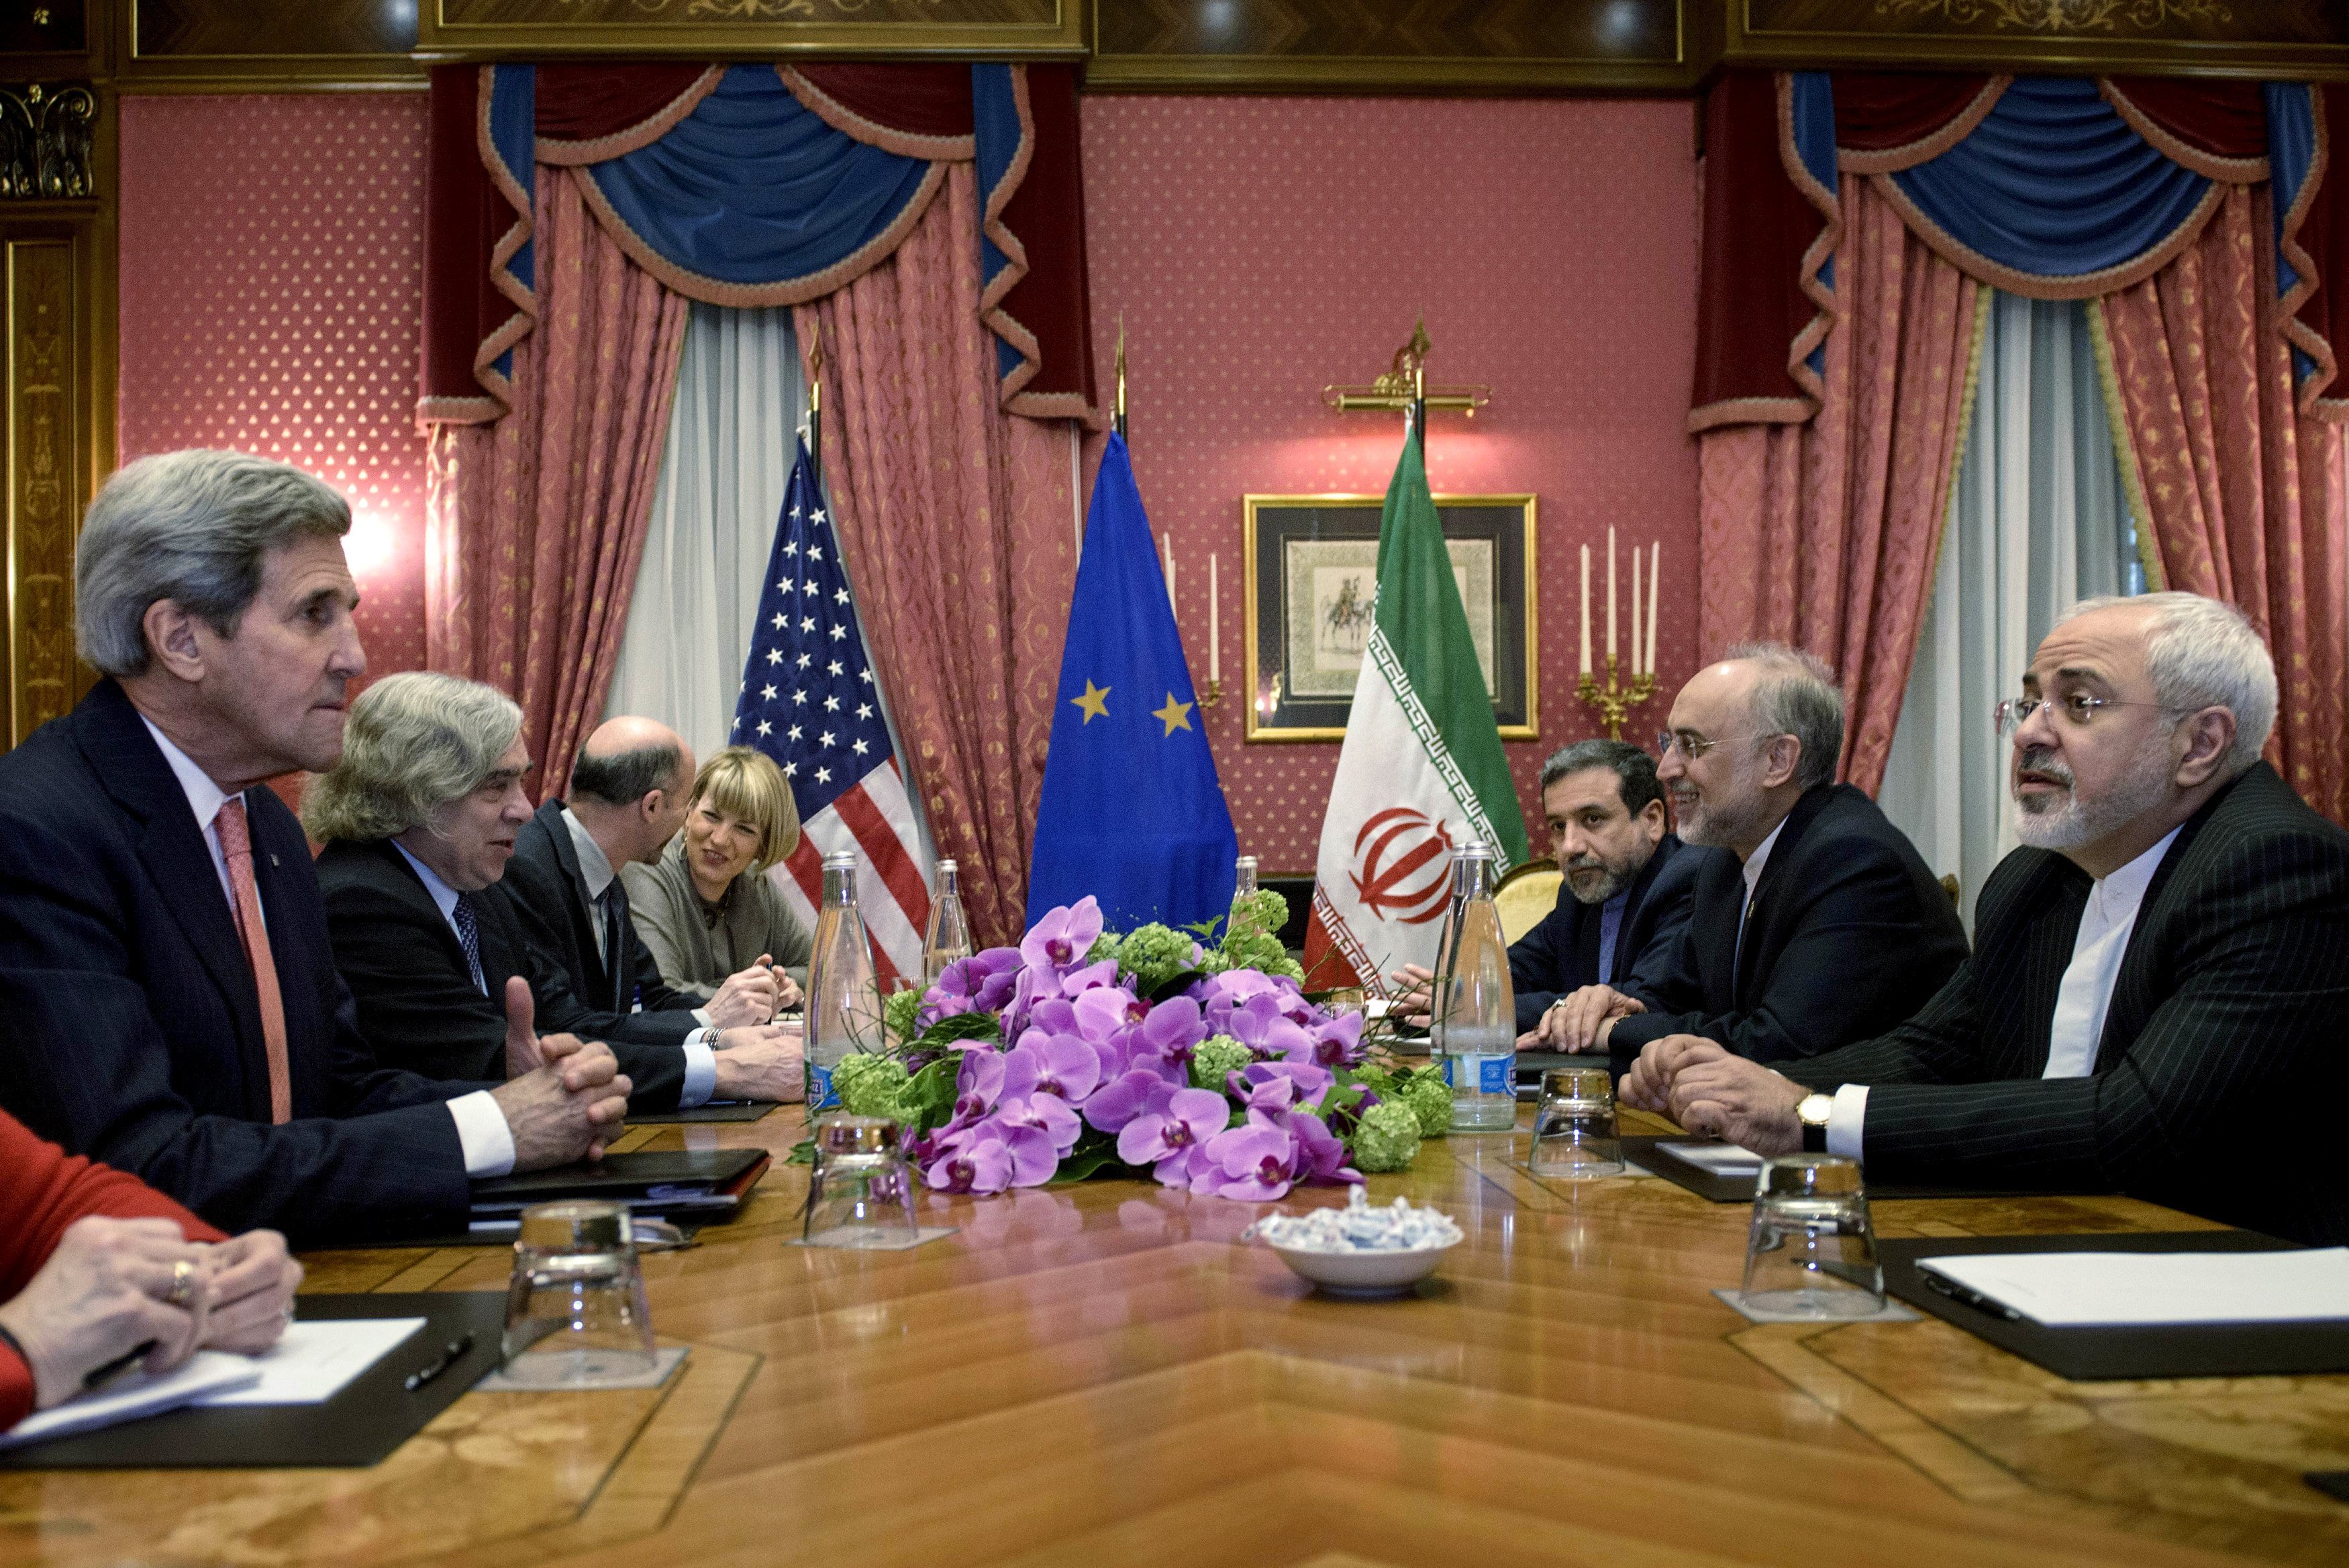 Secretary of State John Kerry, Iranian Foreign Minister Javad Zarif and others wait for a meeting at the Beau Rivage Palace Hotel on March 27, 2015 in Lausanne, Switzerland. (Brendan Smialowski—Reuters)